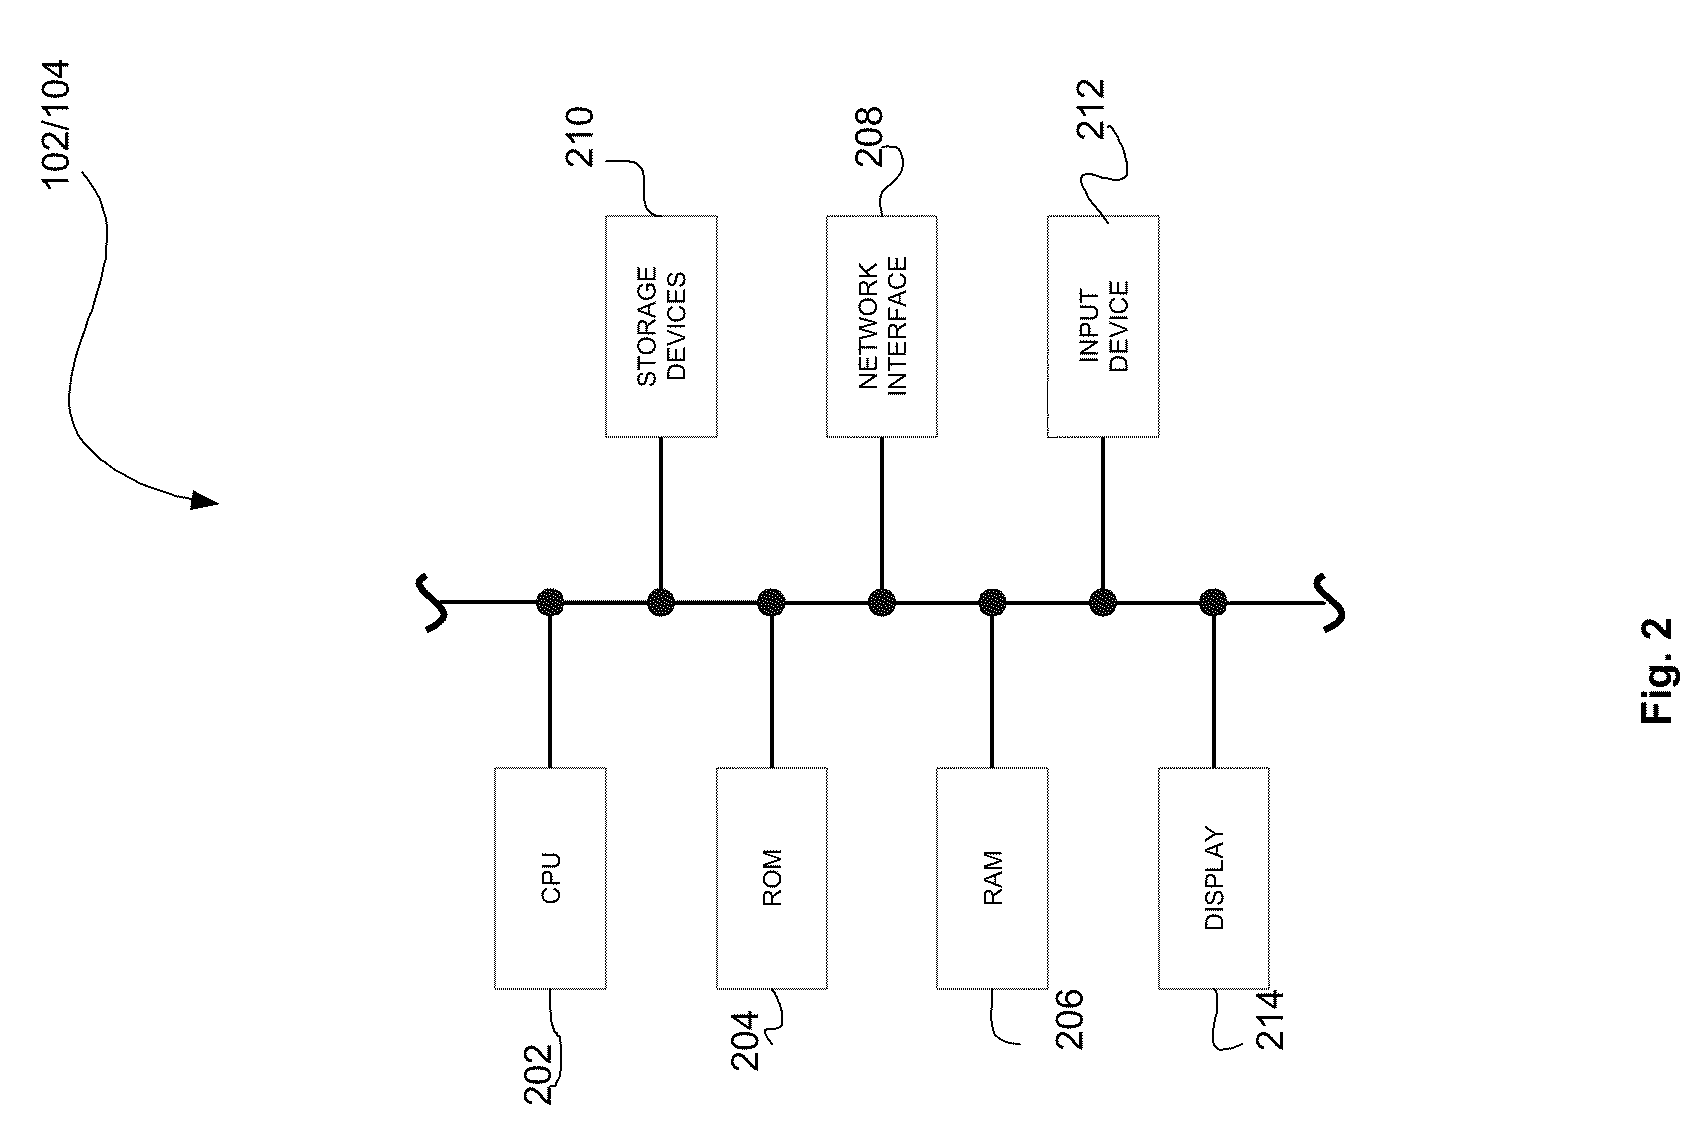 Online closing system and method